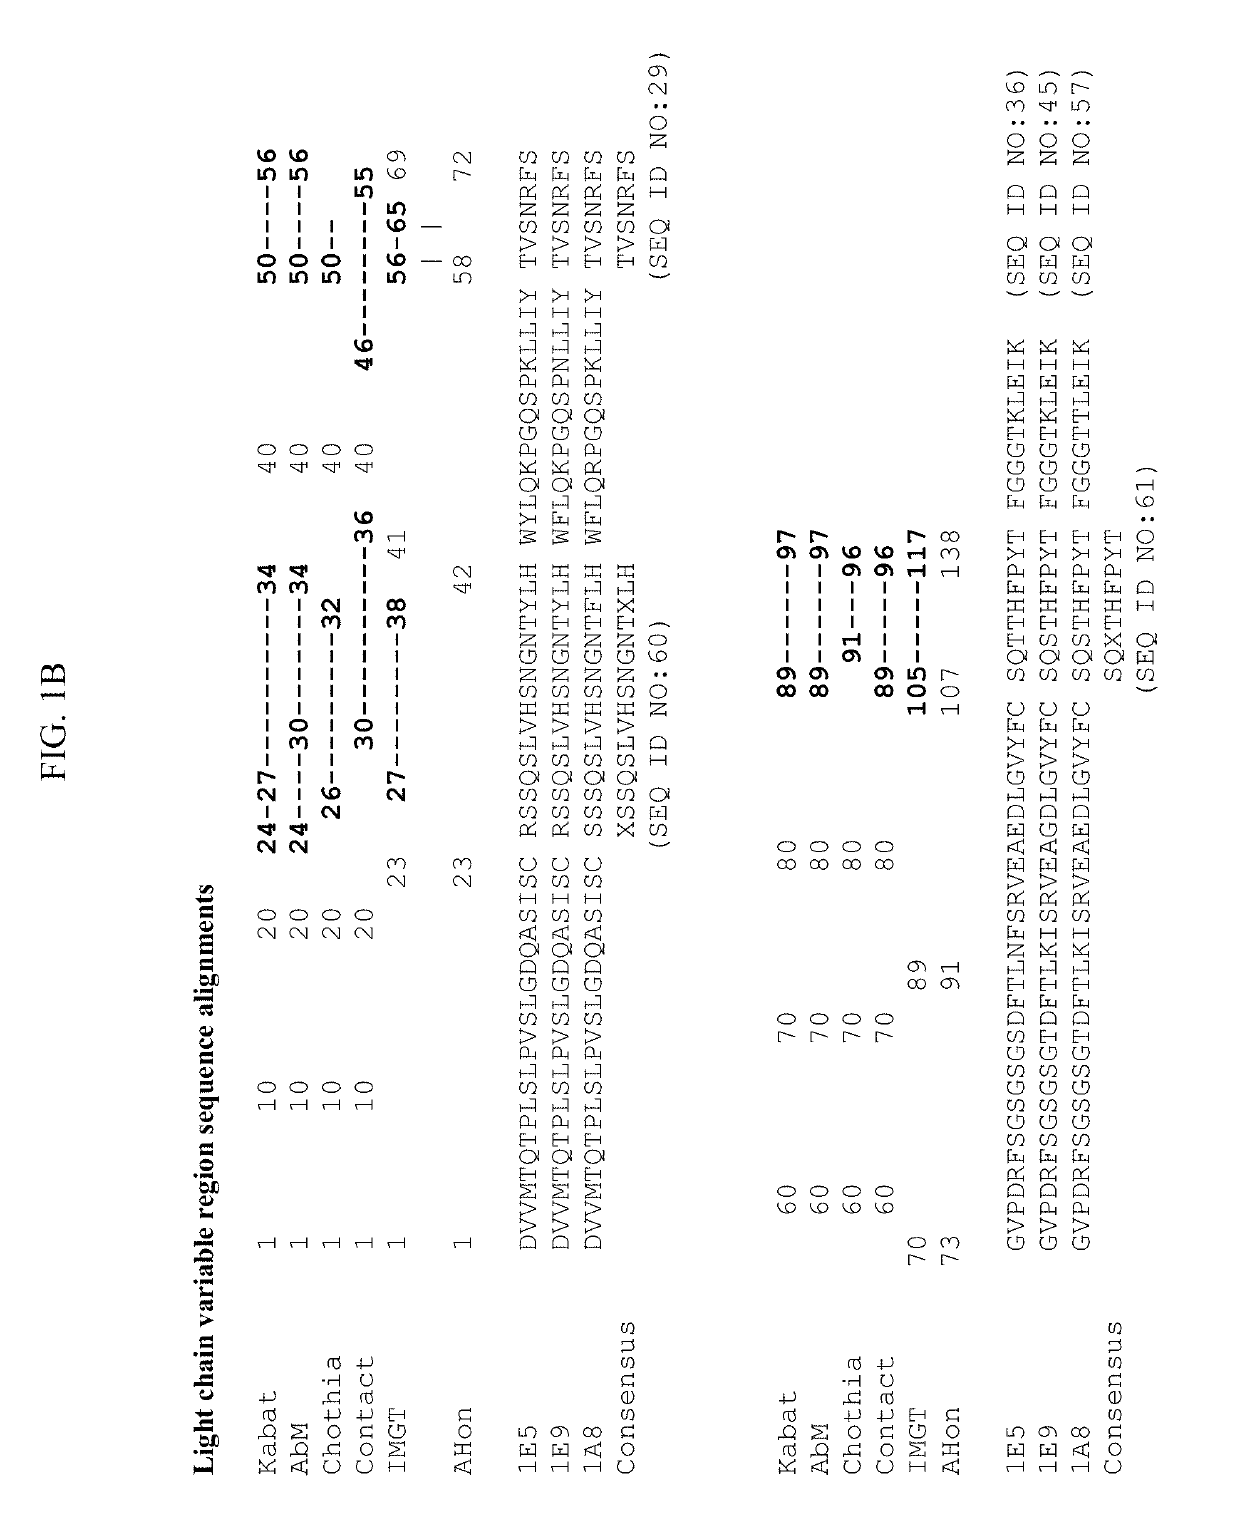 ANGPTL8-binding agents and methods of use thereof